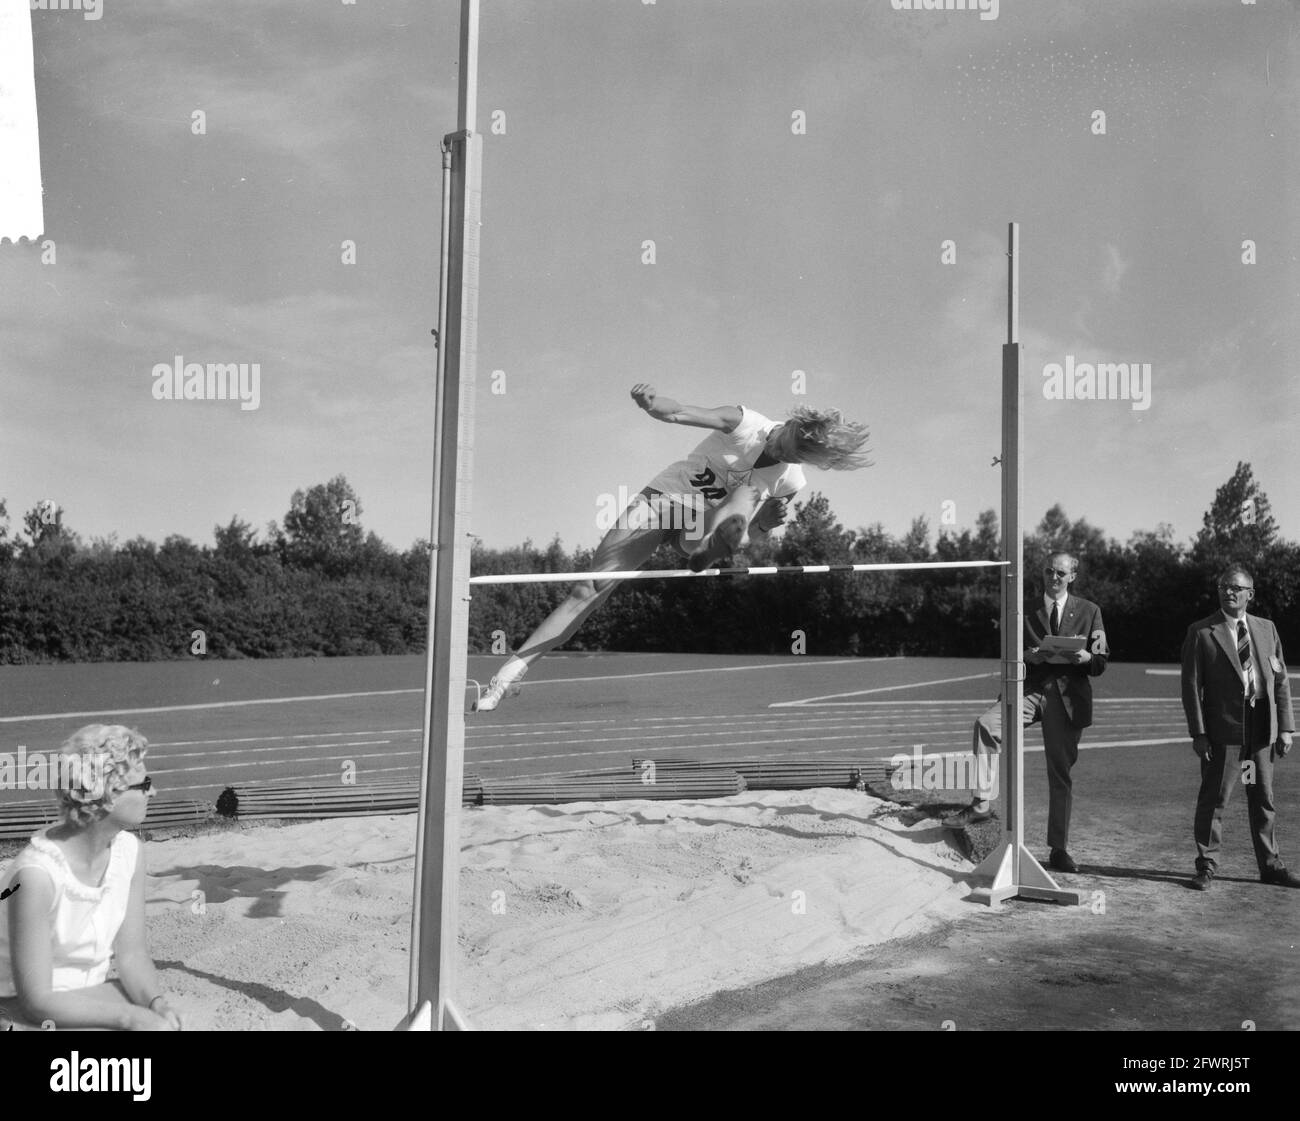 Dutch athletics championships in Groningen, Ms. M. Thomas, in action high jump, August 14, 1965, athletics, championships, The Netherlands, 20th century press agency photo, news to remember, documentary, historic photography 1945-1990, visual stories, human history of the Twentieth Century, capturing moments in time Stock Photo